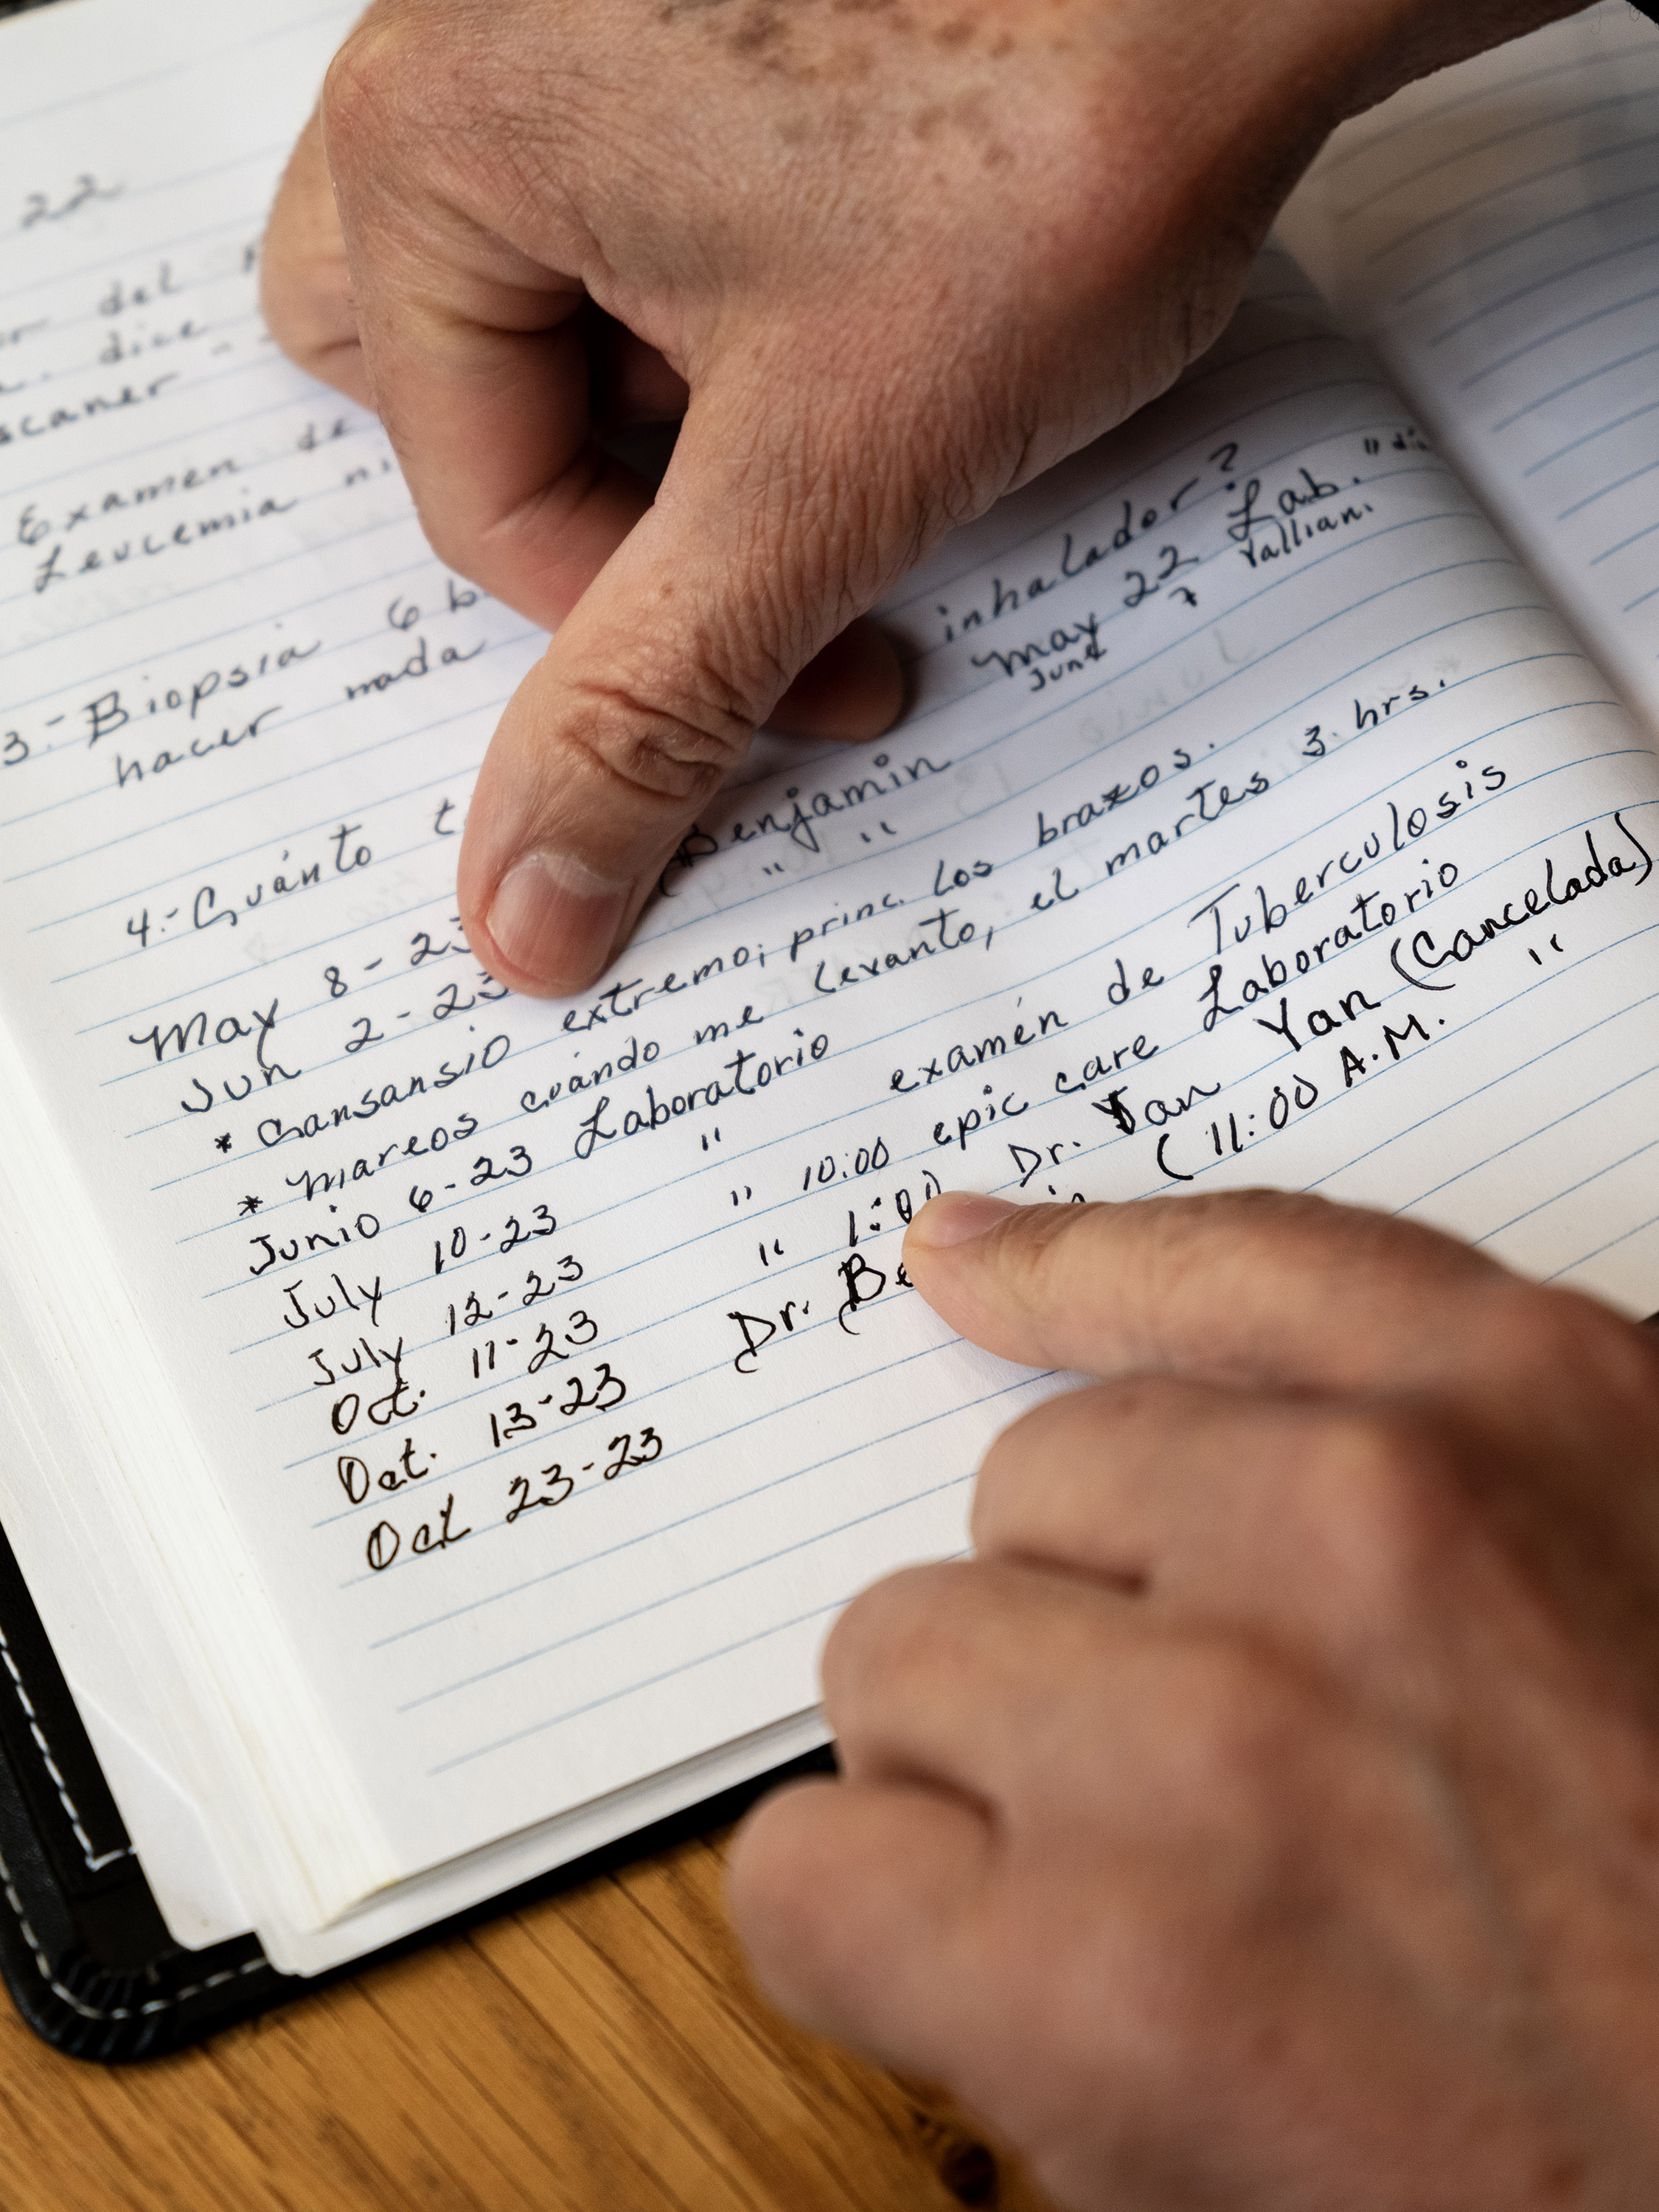 A close up photograph of a notebook Abundis uses to log his medical ailments and appointments.